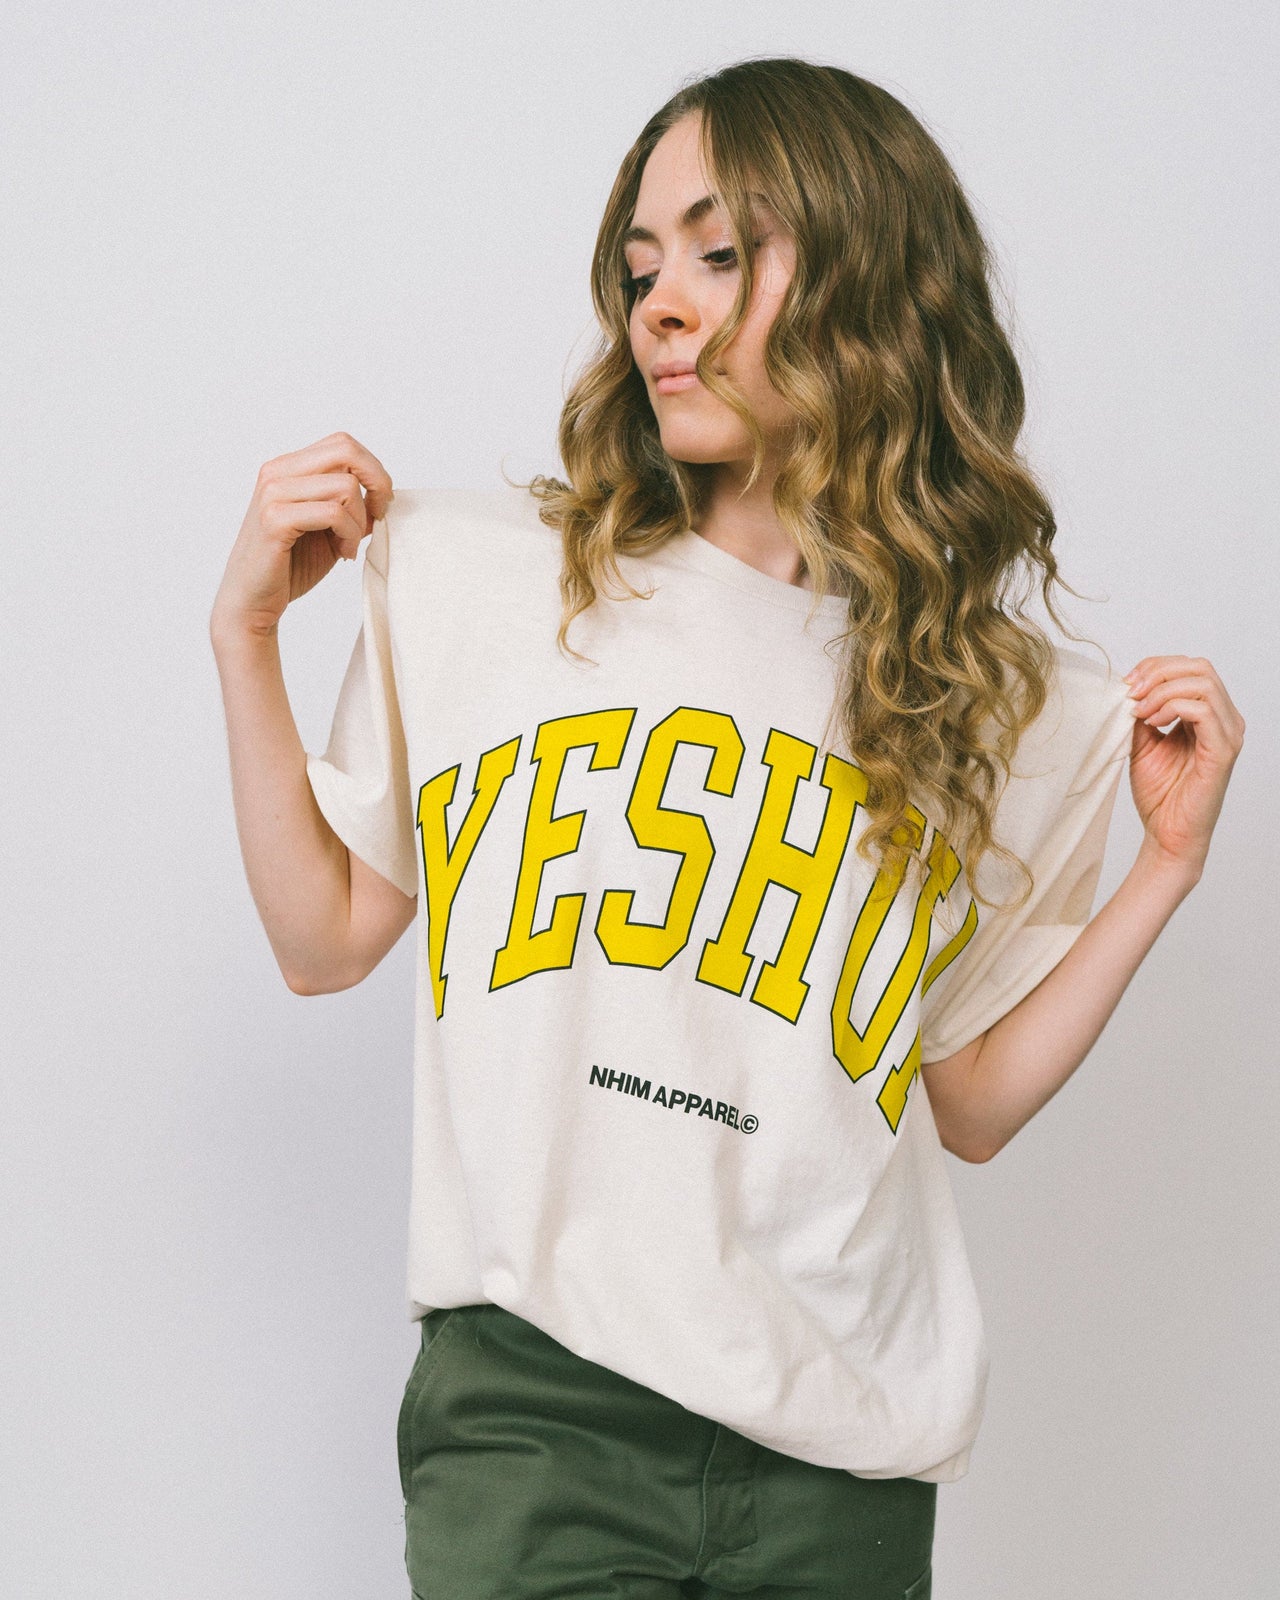 YESHUA Christian T-Shirts from NHIM Apparel Christian Clothing Brand, natural T-Shirt with yellow writing